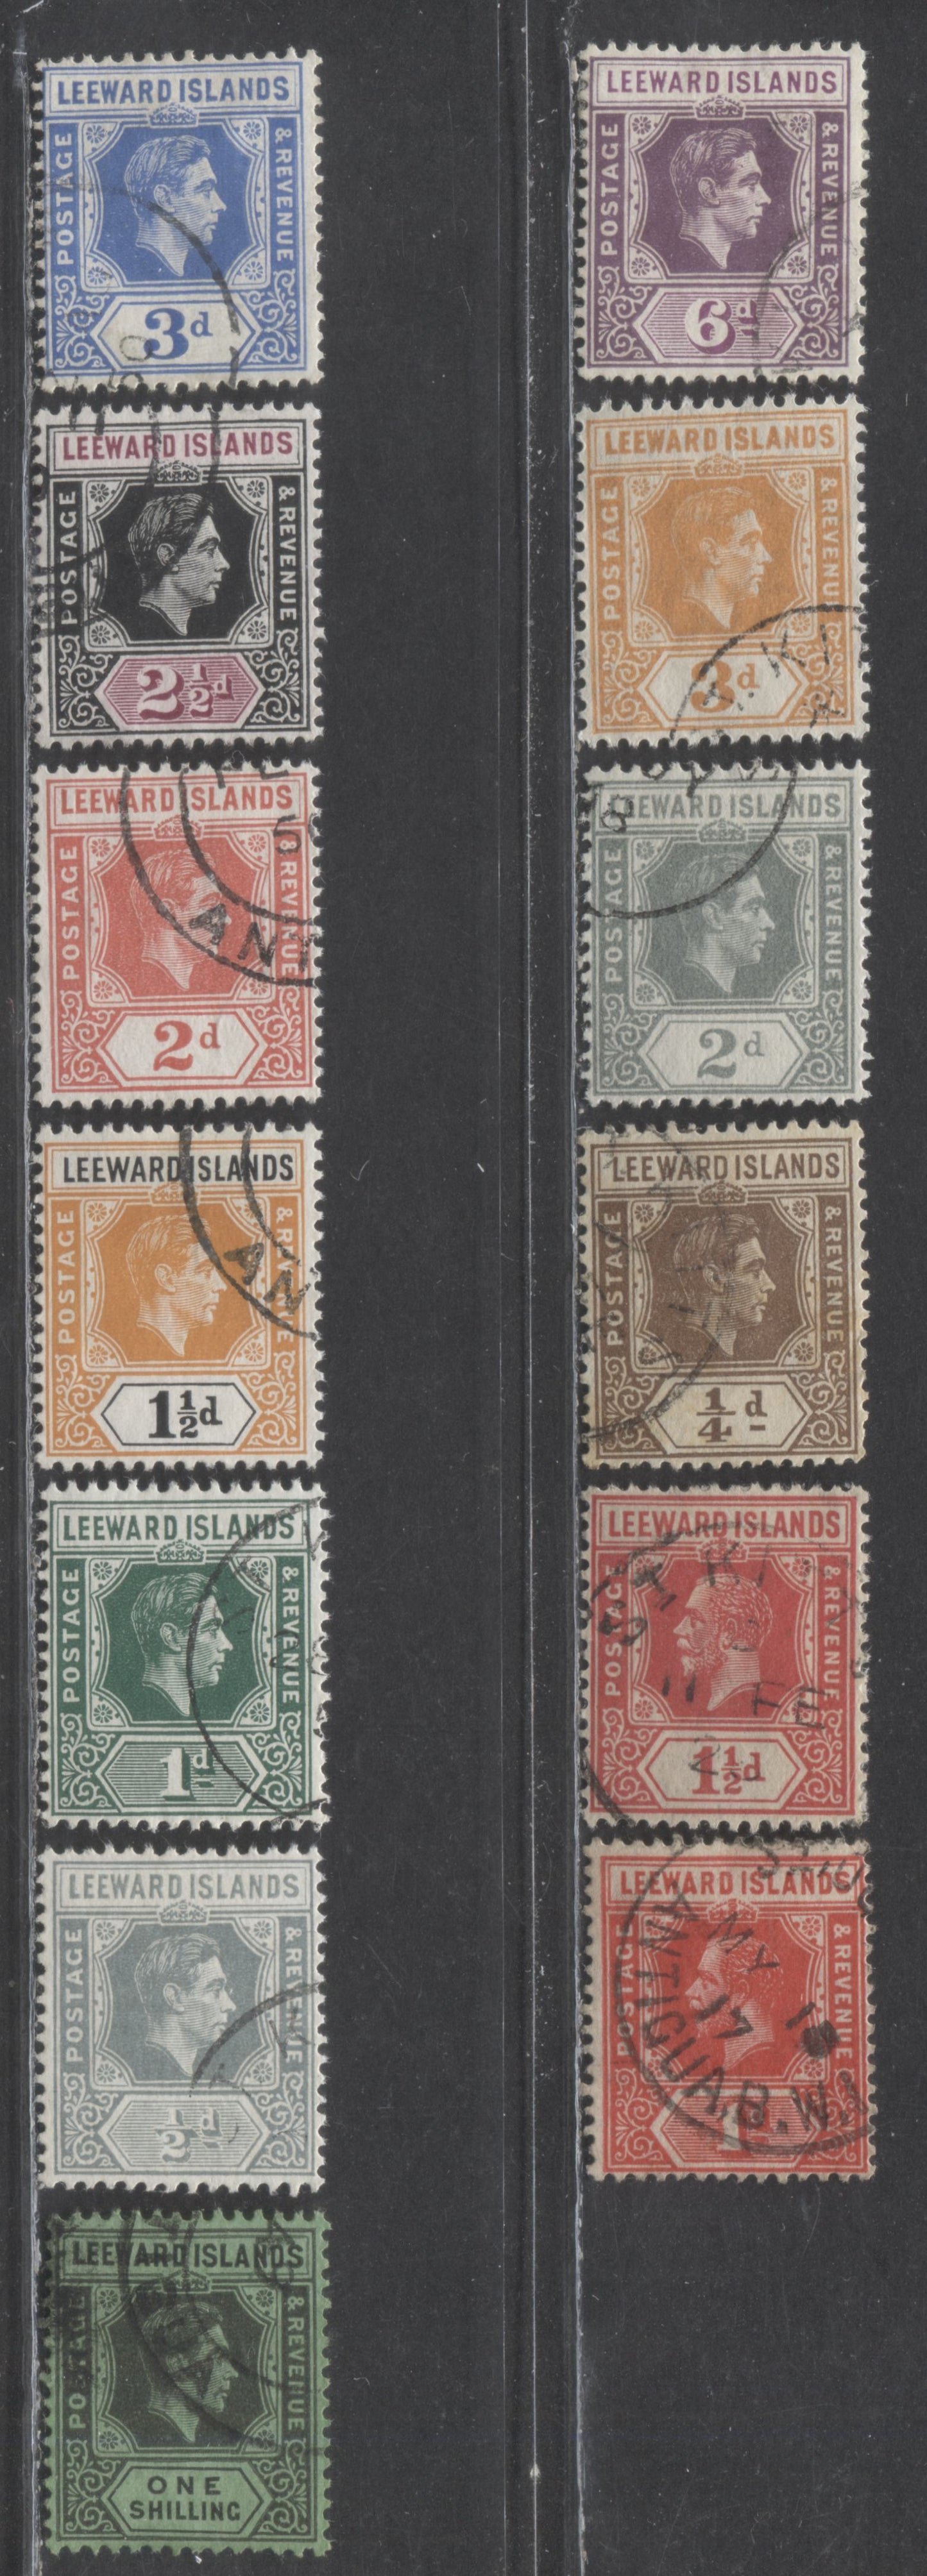 Lot 444 Leeward Islands SC#48a/125 1912-1951 Keyplate Definitives, 13 Fine/Very Fine Used Singles, Click on Listing to See ALL Pictures, 2022 Scott Classic Cat. $16.65 USD